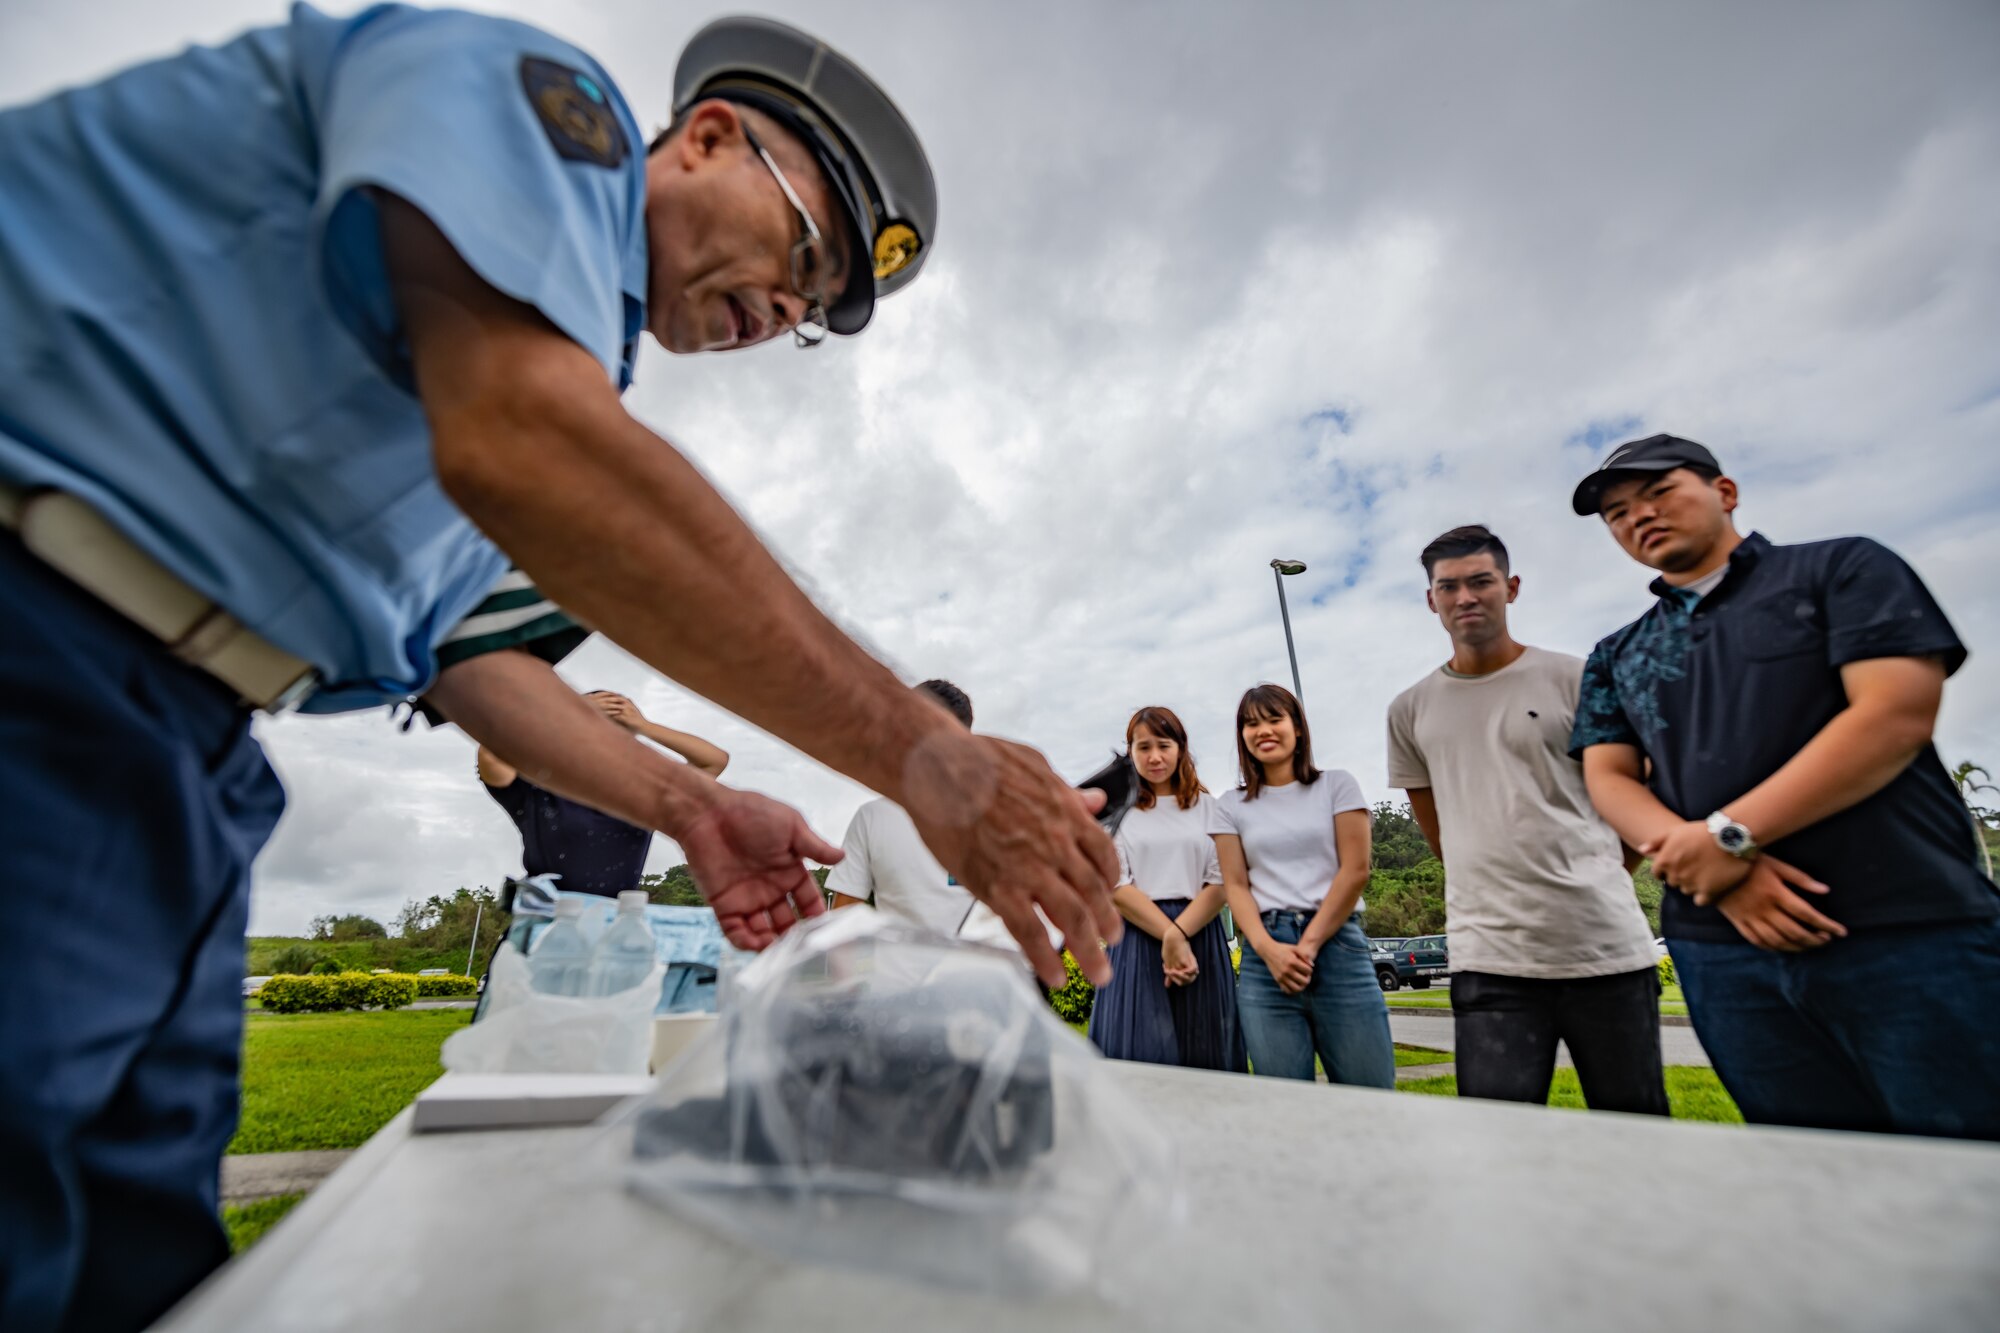 An Okinawa Prefectural Police officer shows students how they collect breathalyzer samples during Air Force Immersion Day, Sept. 23, 2019, at Kadena Air Base, Japan. The 18th Security Forces Squadron teamed up with the police to educate local students about their bilateral partnership and combined effort to combat and reduce intoxicated drivers on island. (U.S. Air Force photo by Staff Sgt. Micaiah Anthony)